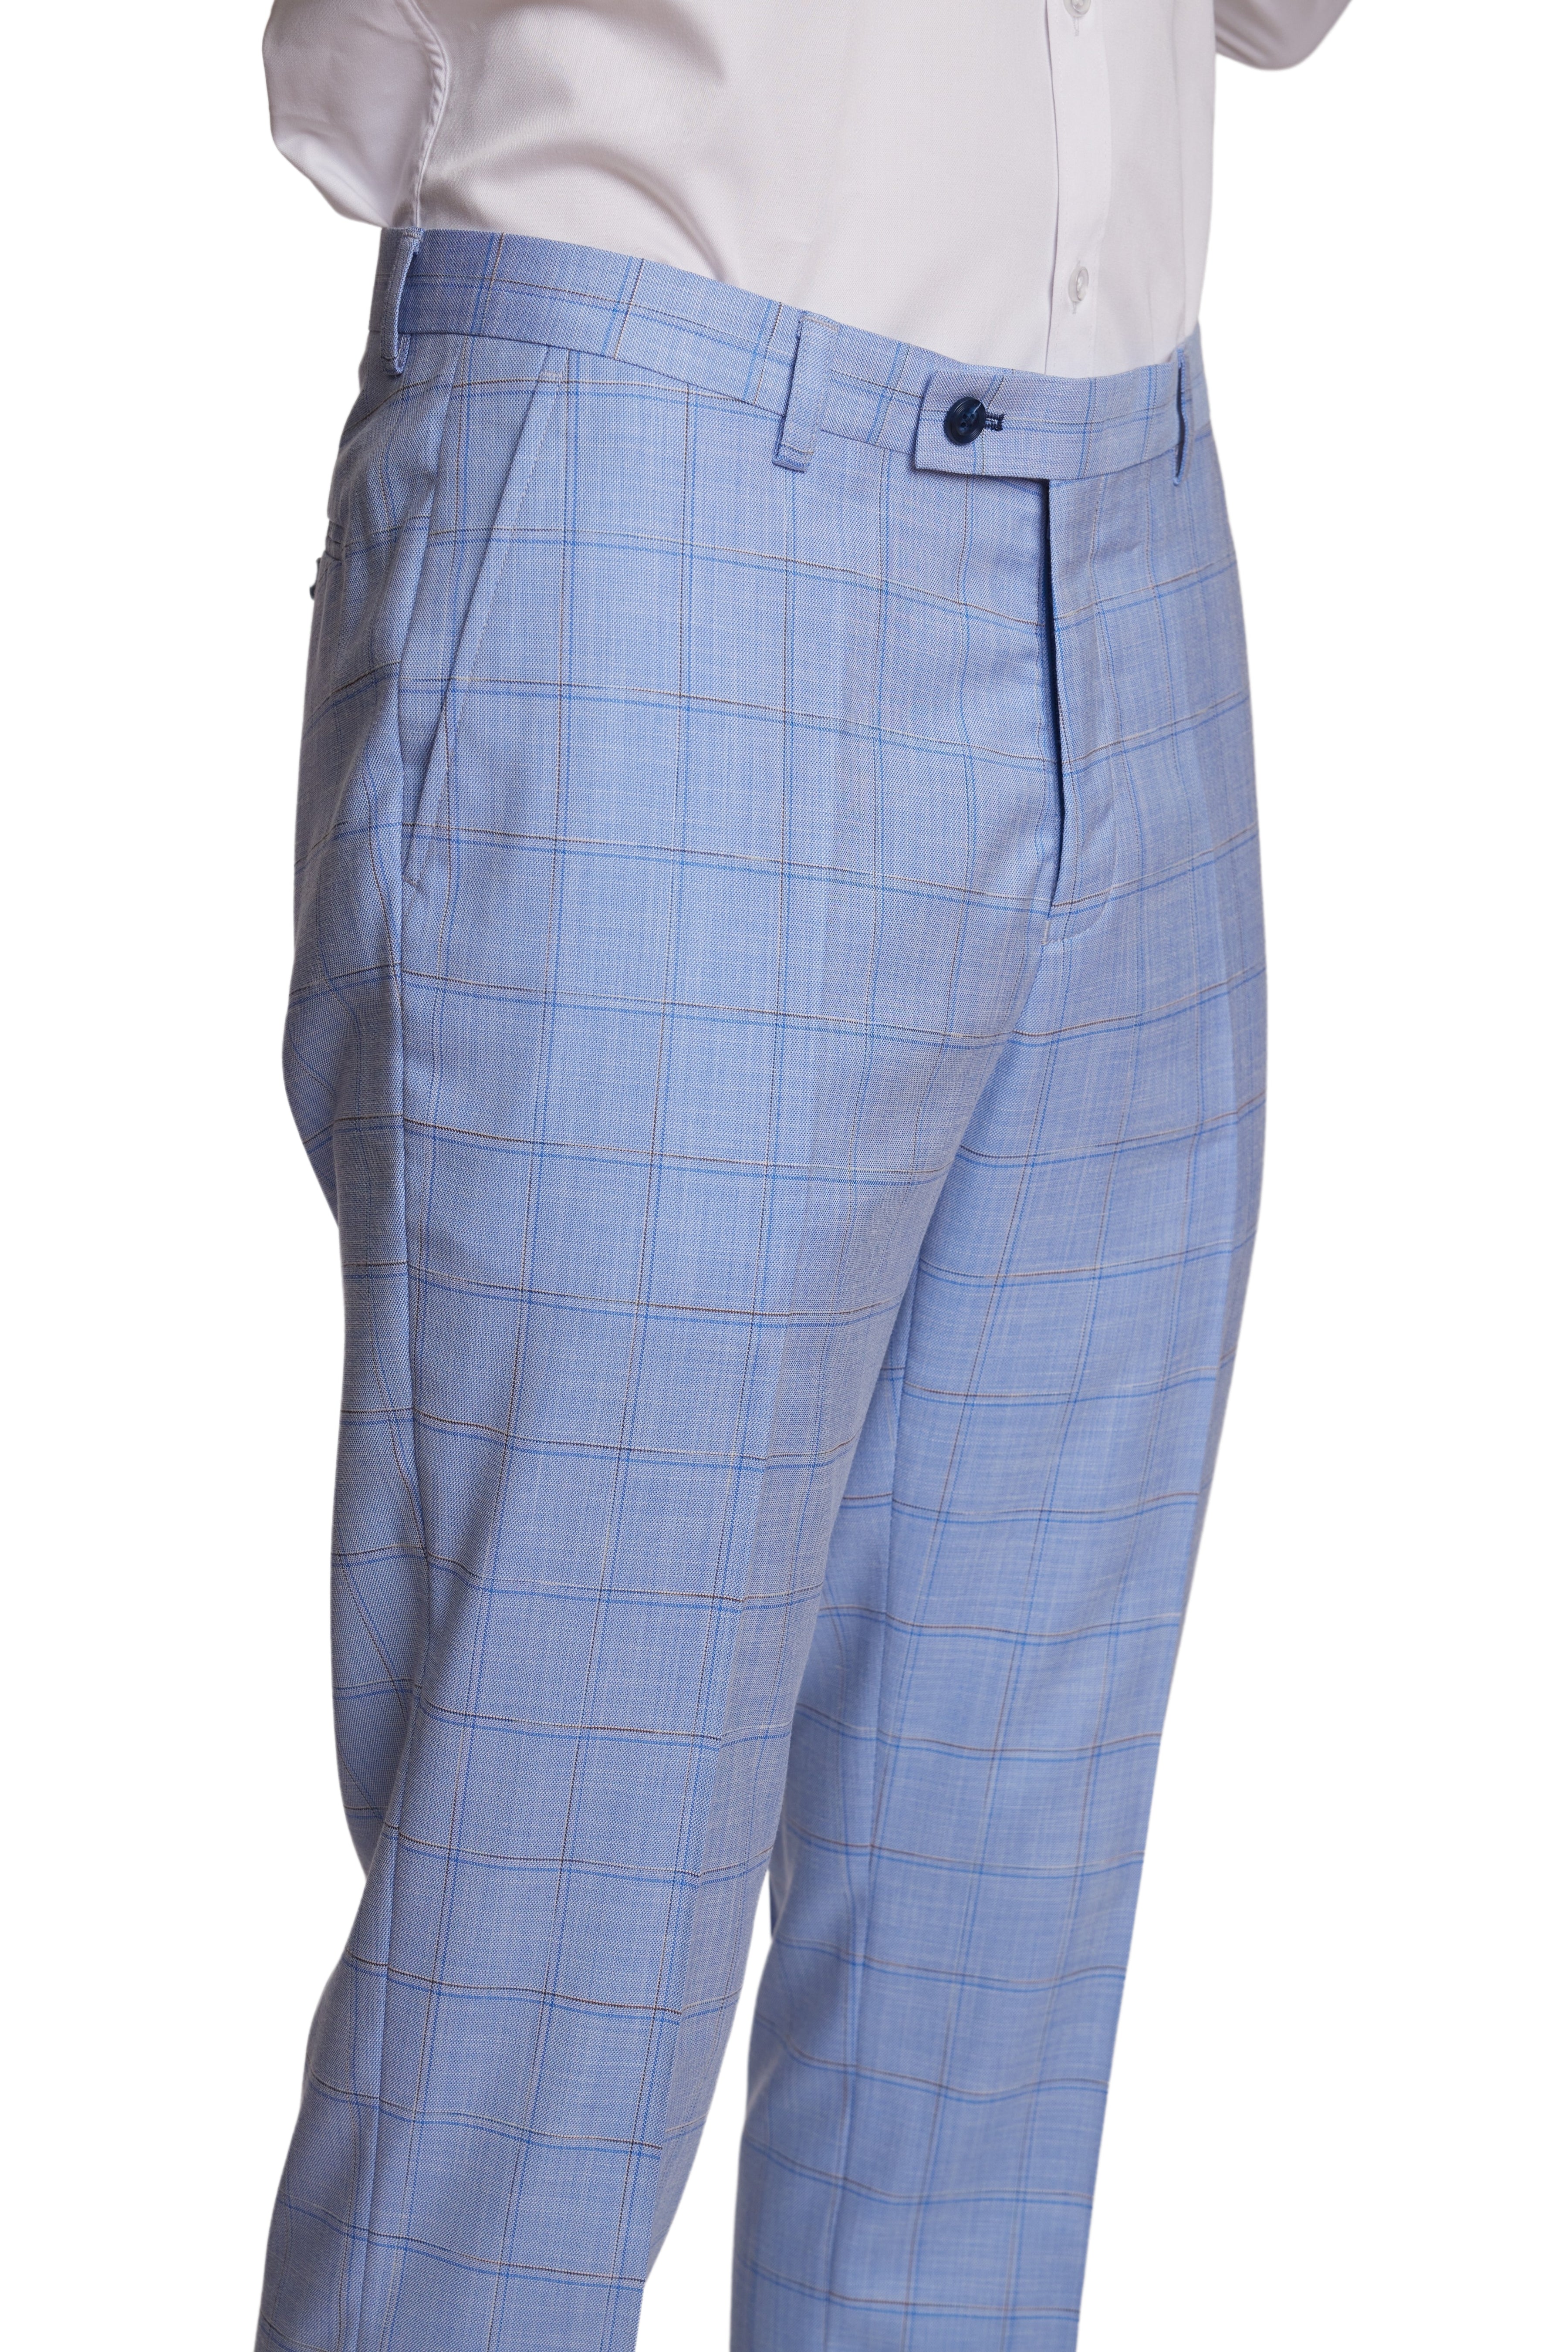 Downing Pants - slim - Blue Double Check